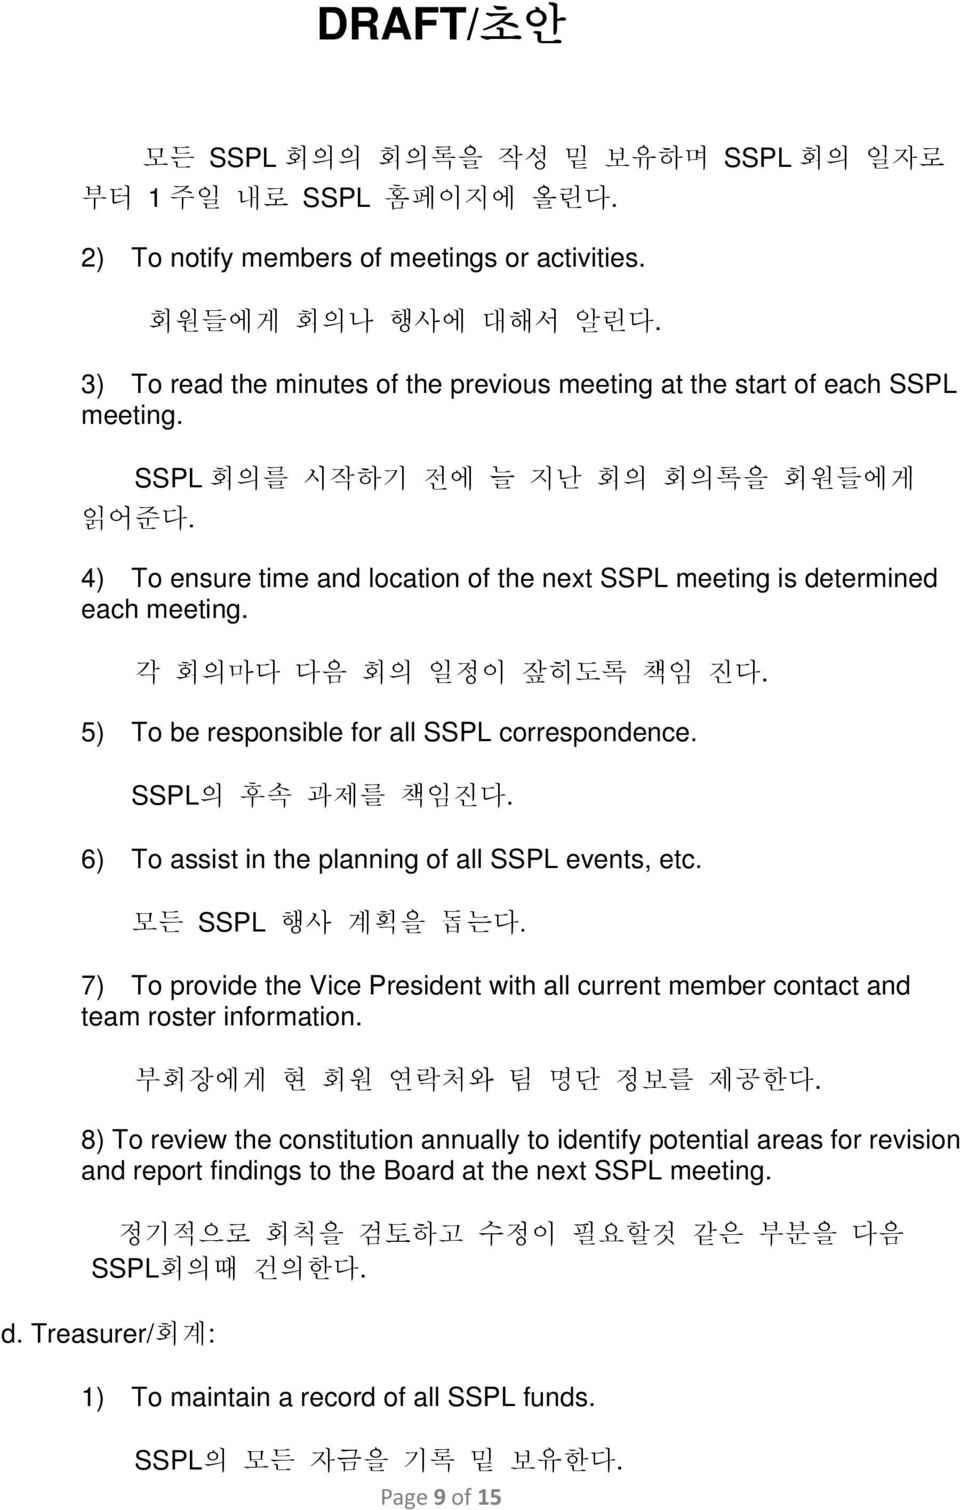 4) To ensure time and location of the next SSPL meeting is determined each meeting. 각 회의마다 다음 회의 일정이 잪히도록 책임 진다. 5) To be responsible for all SSPL correspondence. SSPL의 후속 과제를 책임진다.